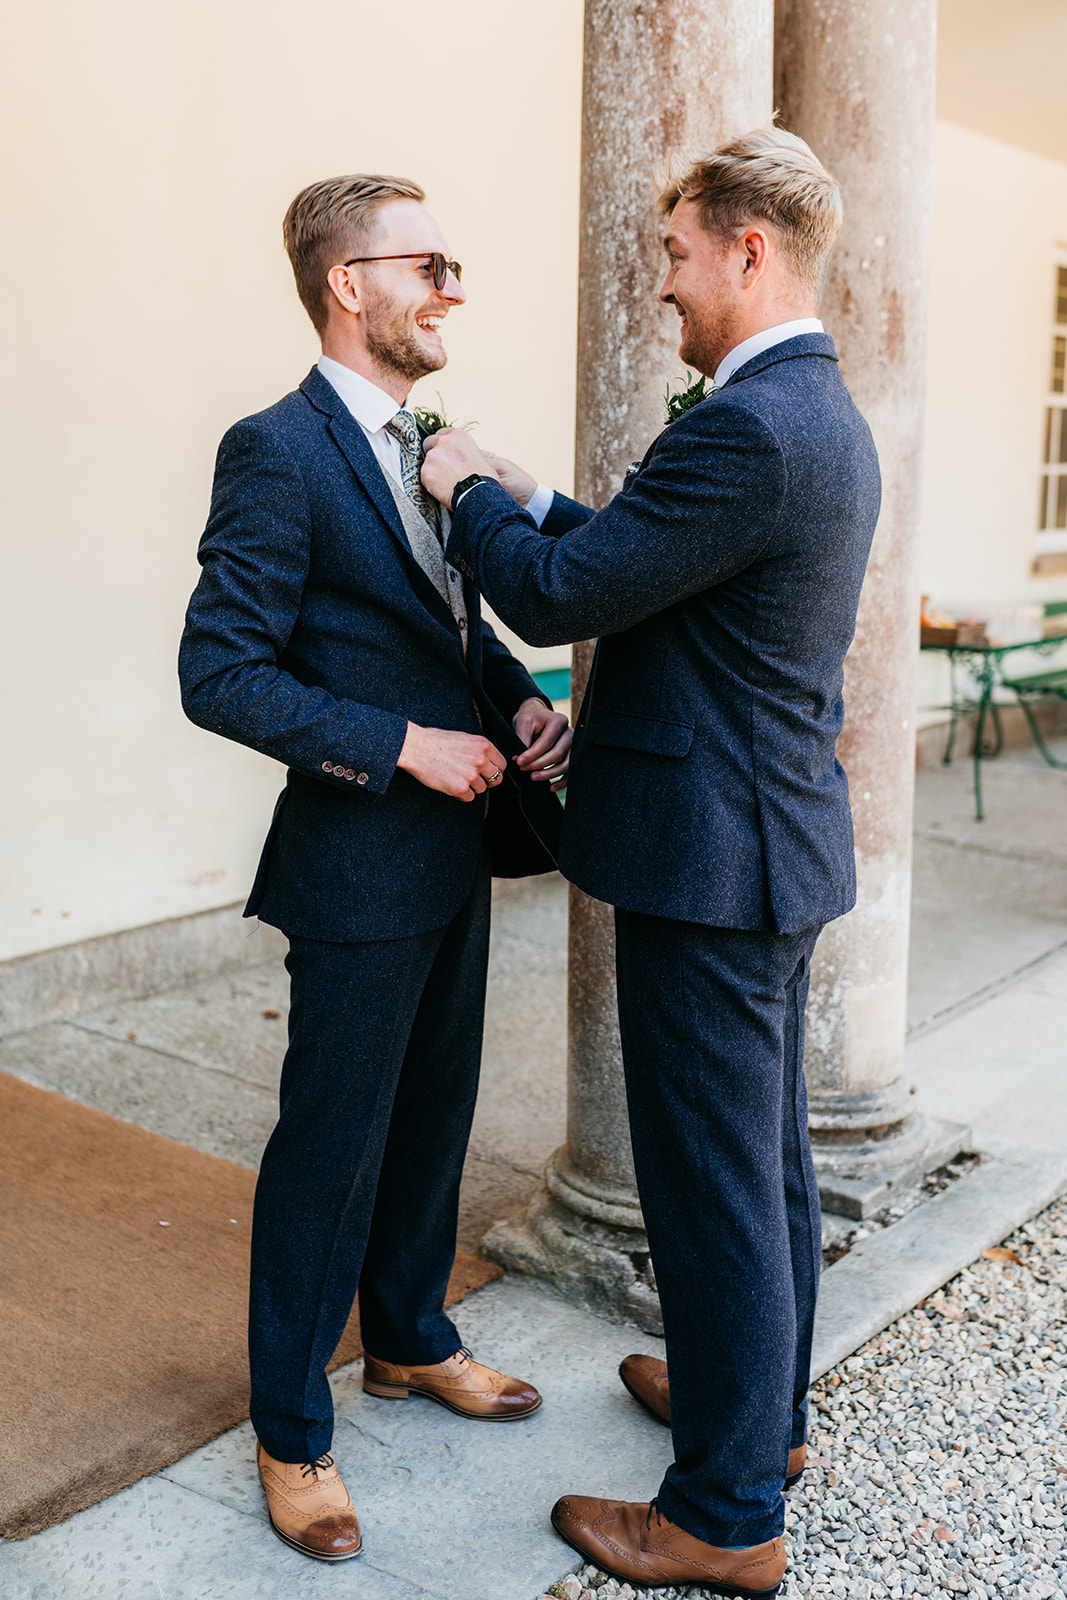 The best man putting on the grooms buttonhole